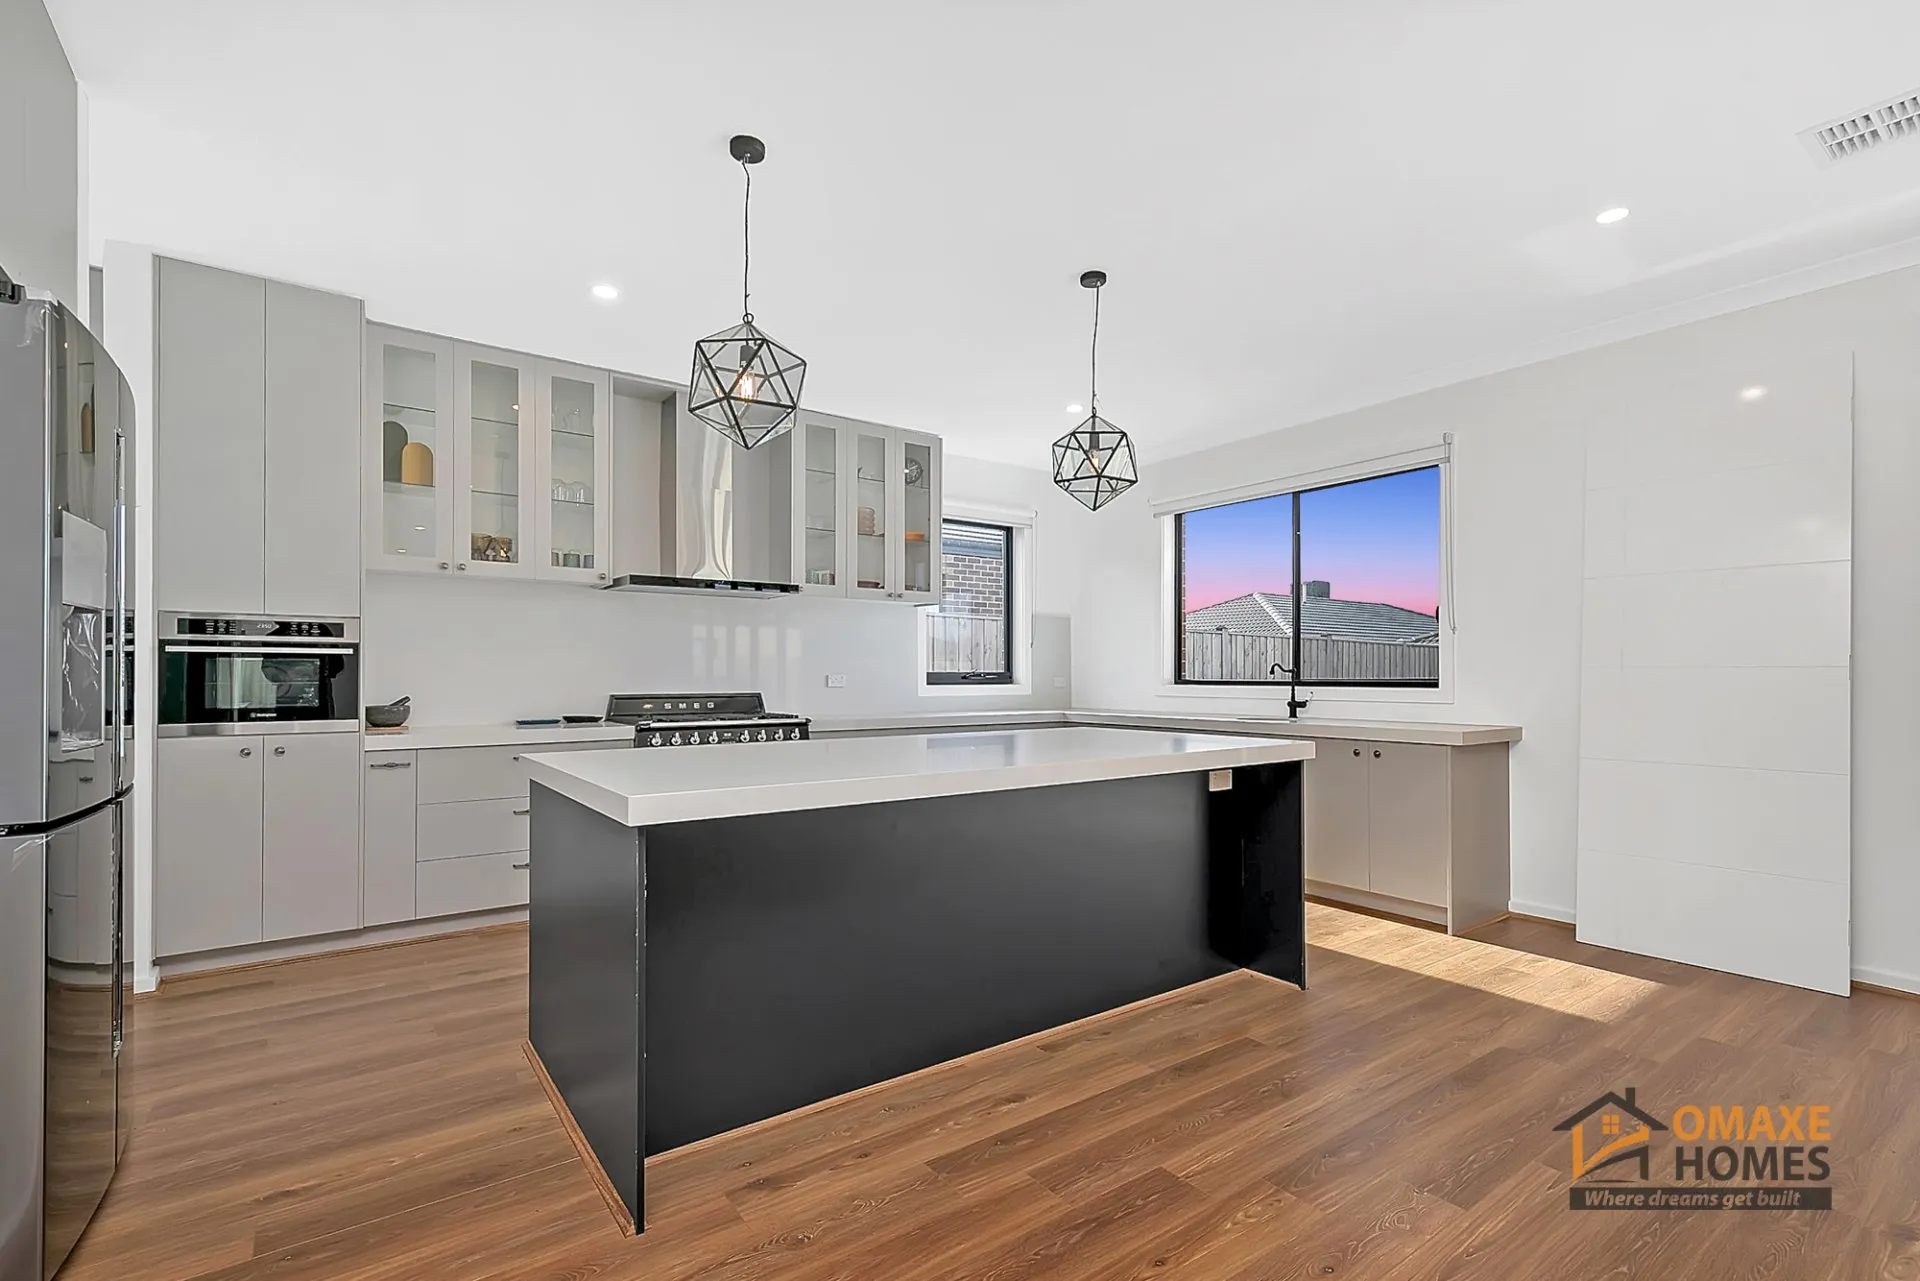 Get Your Kitchen Design Right For Your Custom Built Home In Craigieburn!